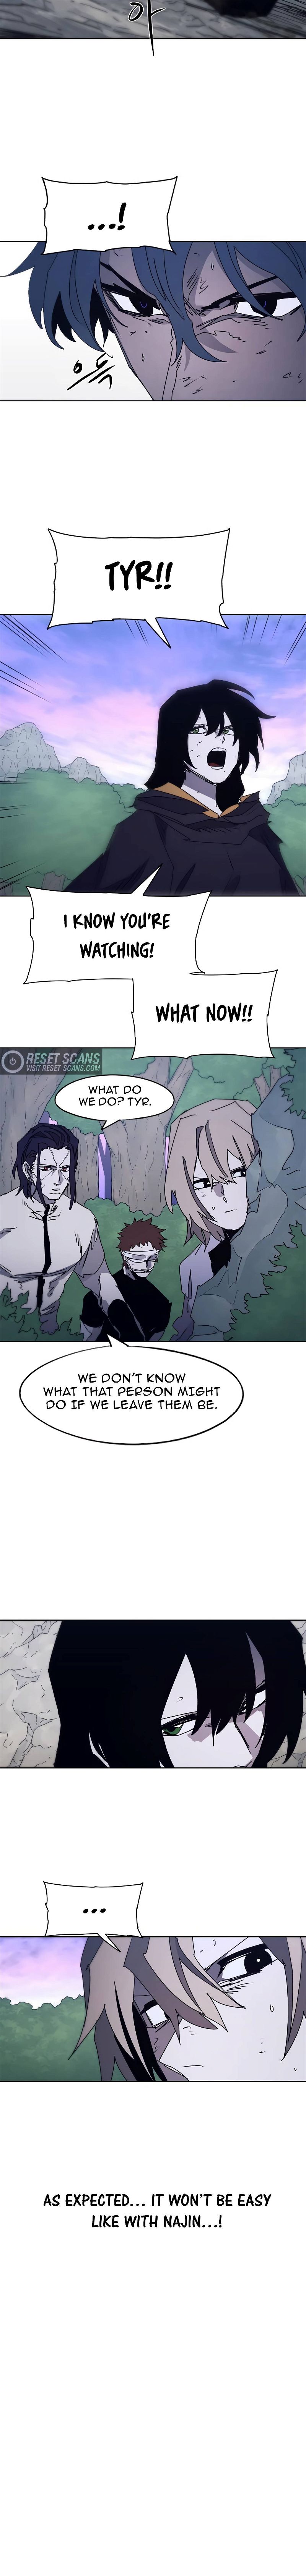 The Knight of Embers Chapter 87 page 2